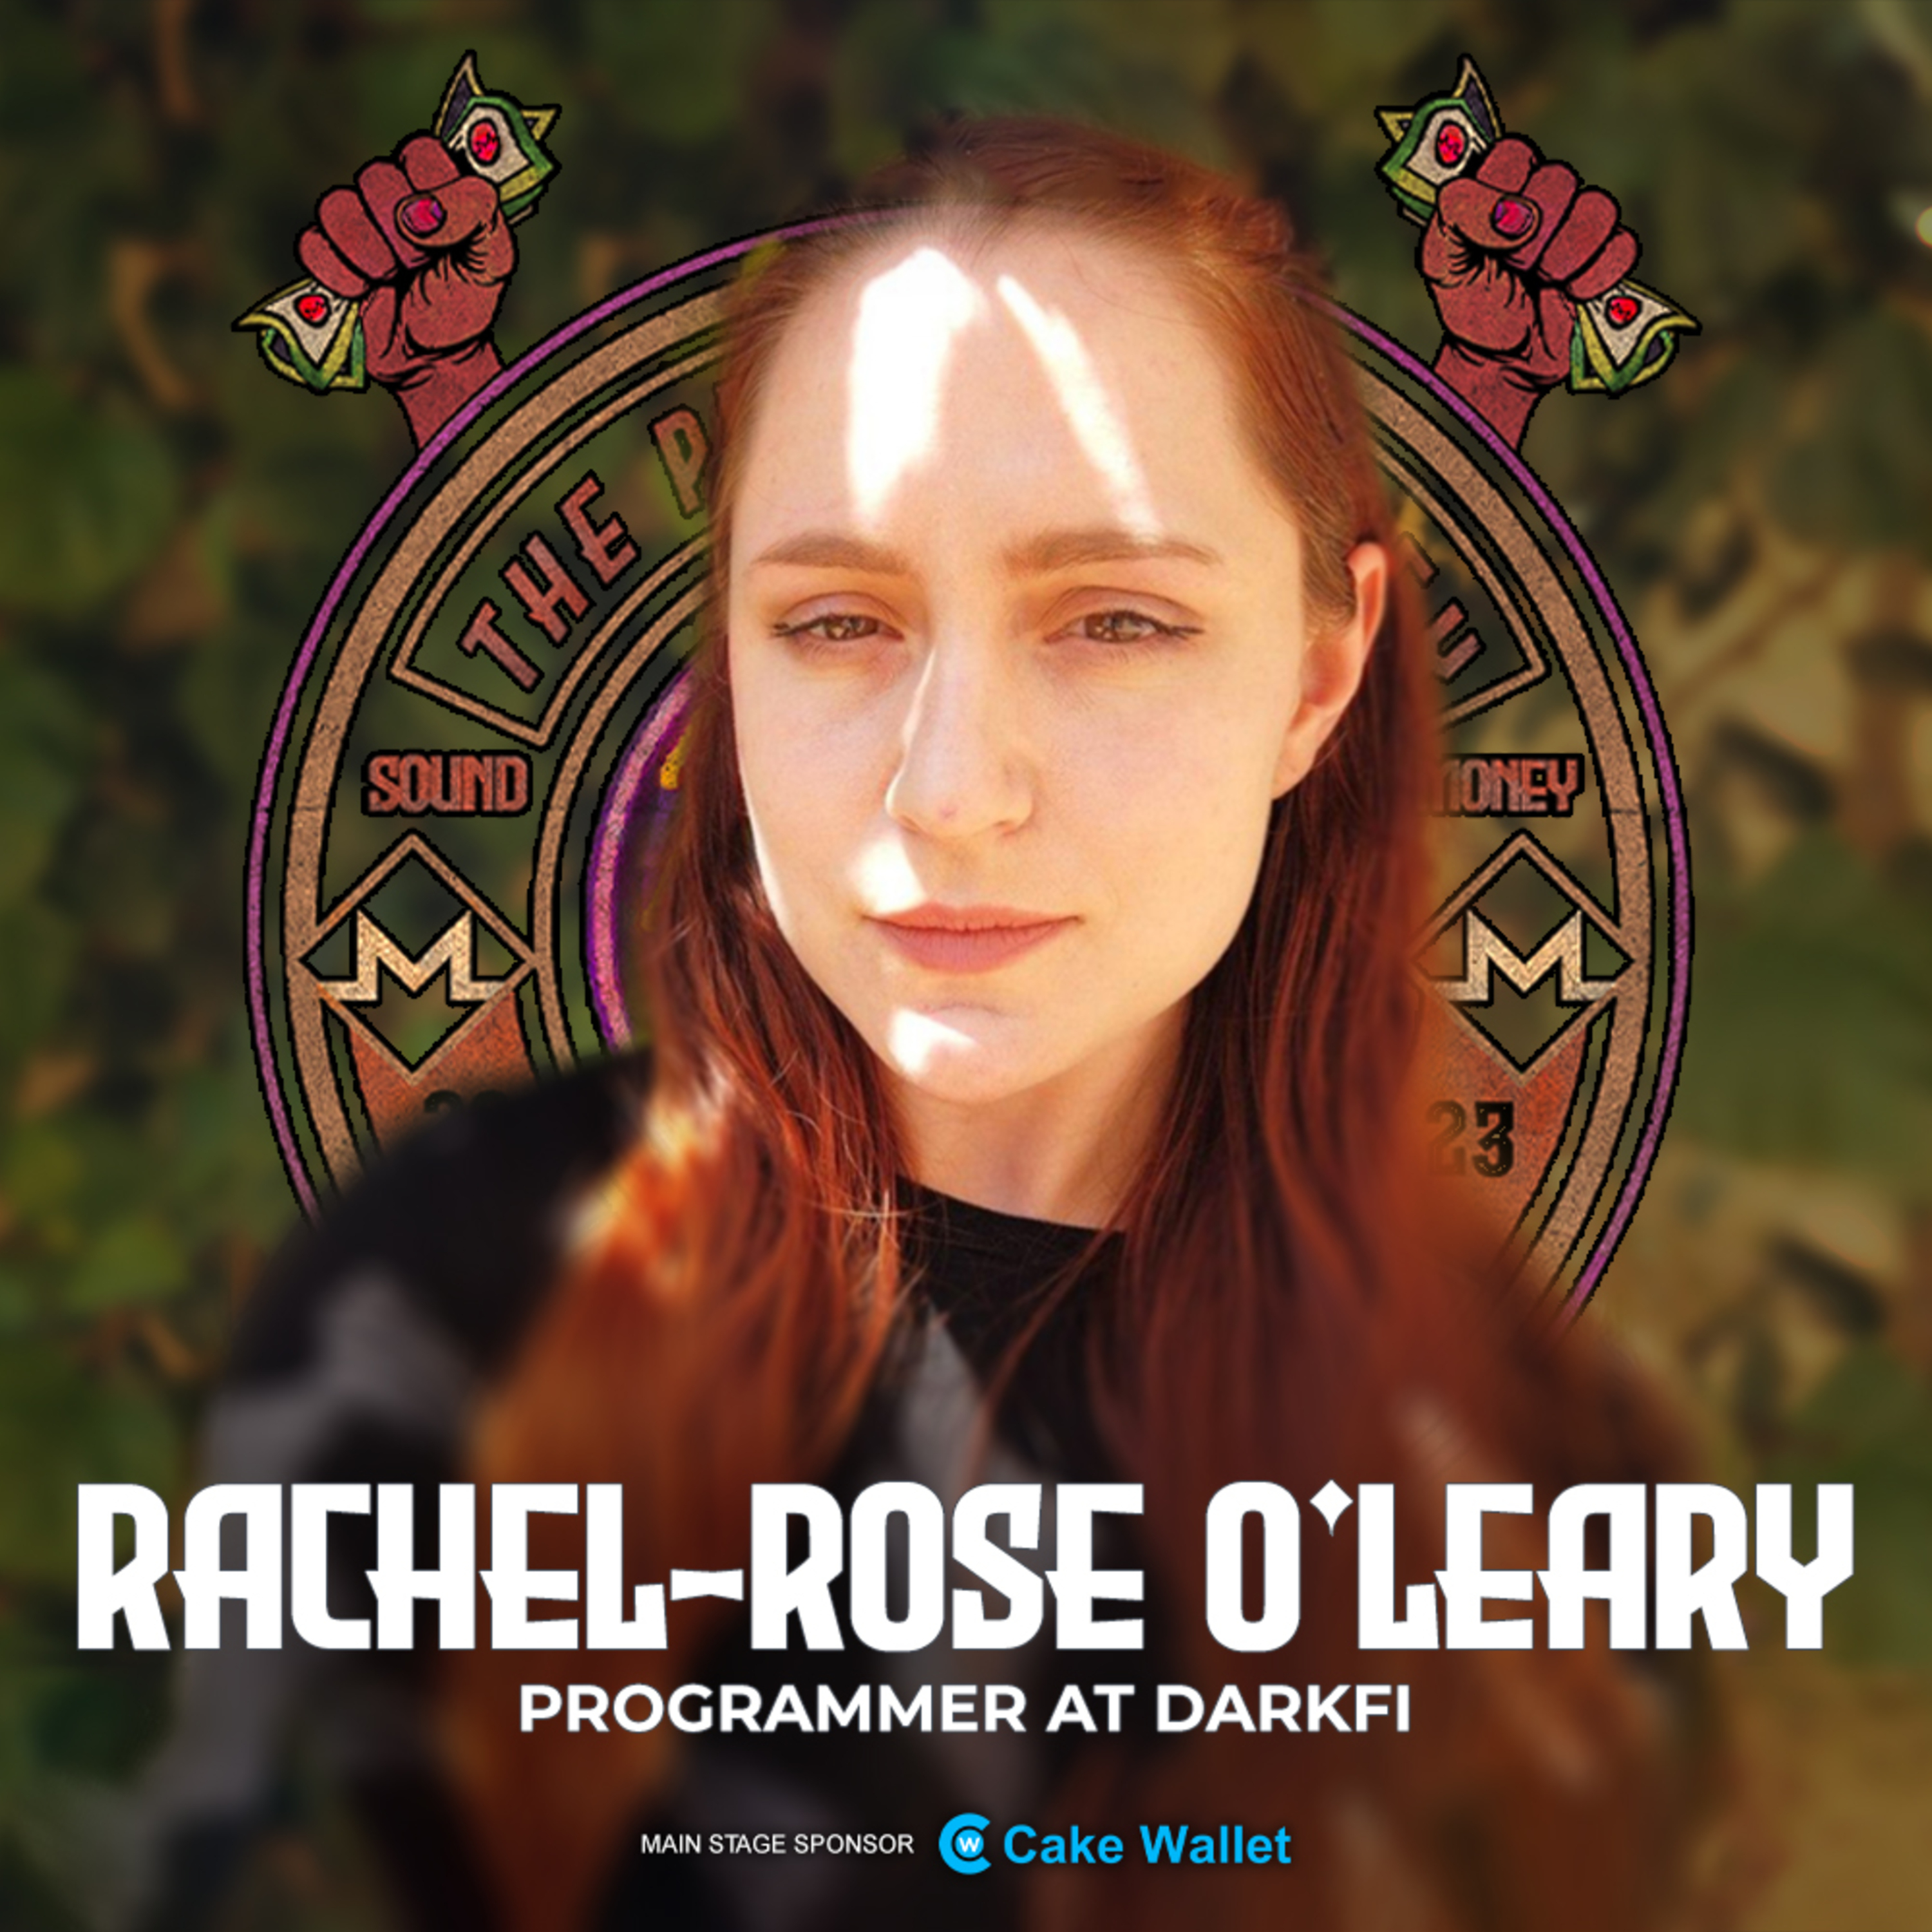 Anon Tech Revolution: Why and How with Rachel-Rose O'leary from DarkFi (Monerotopia23)